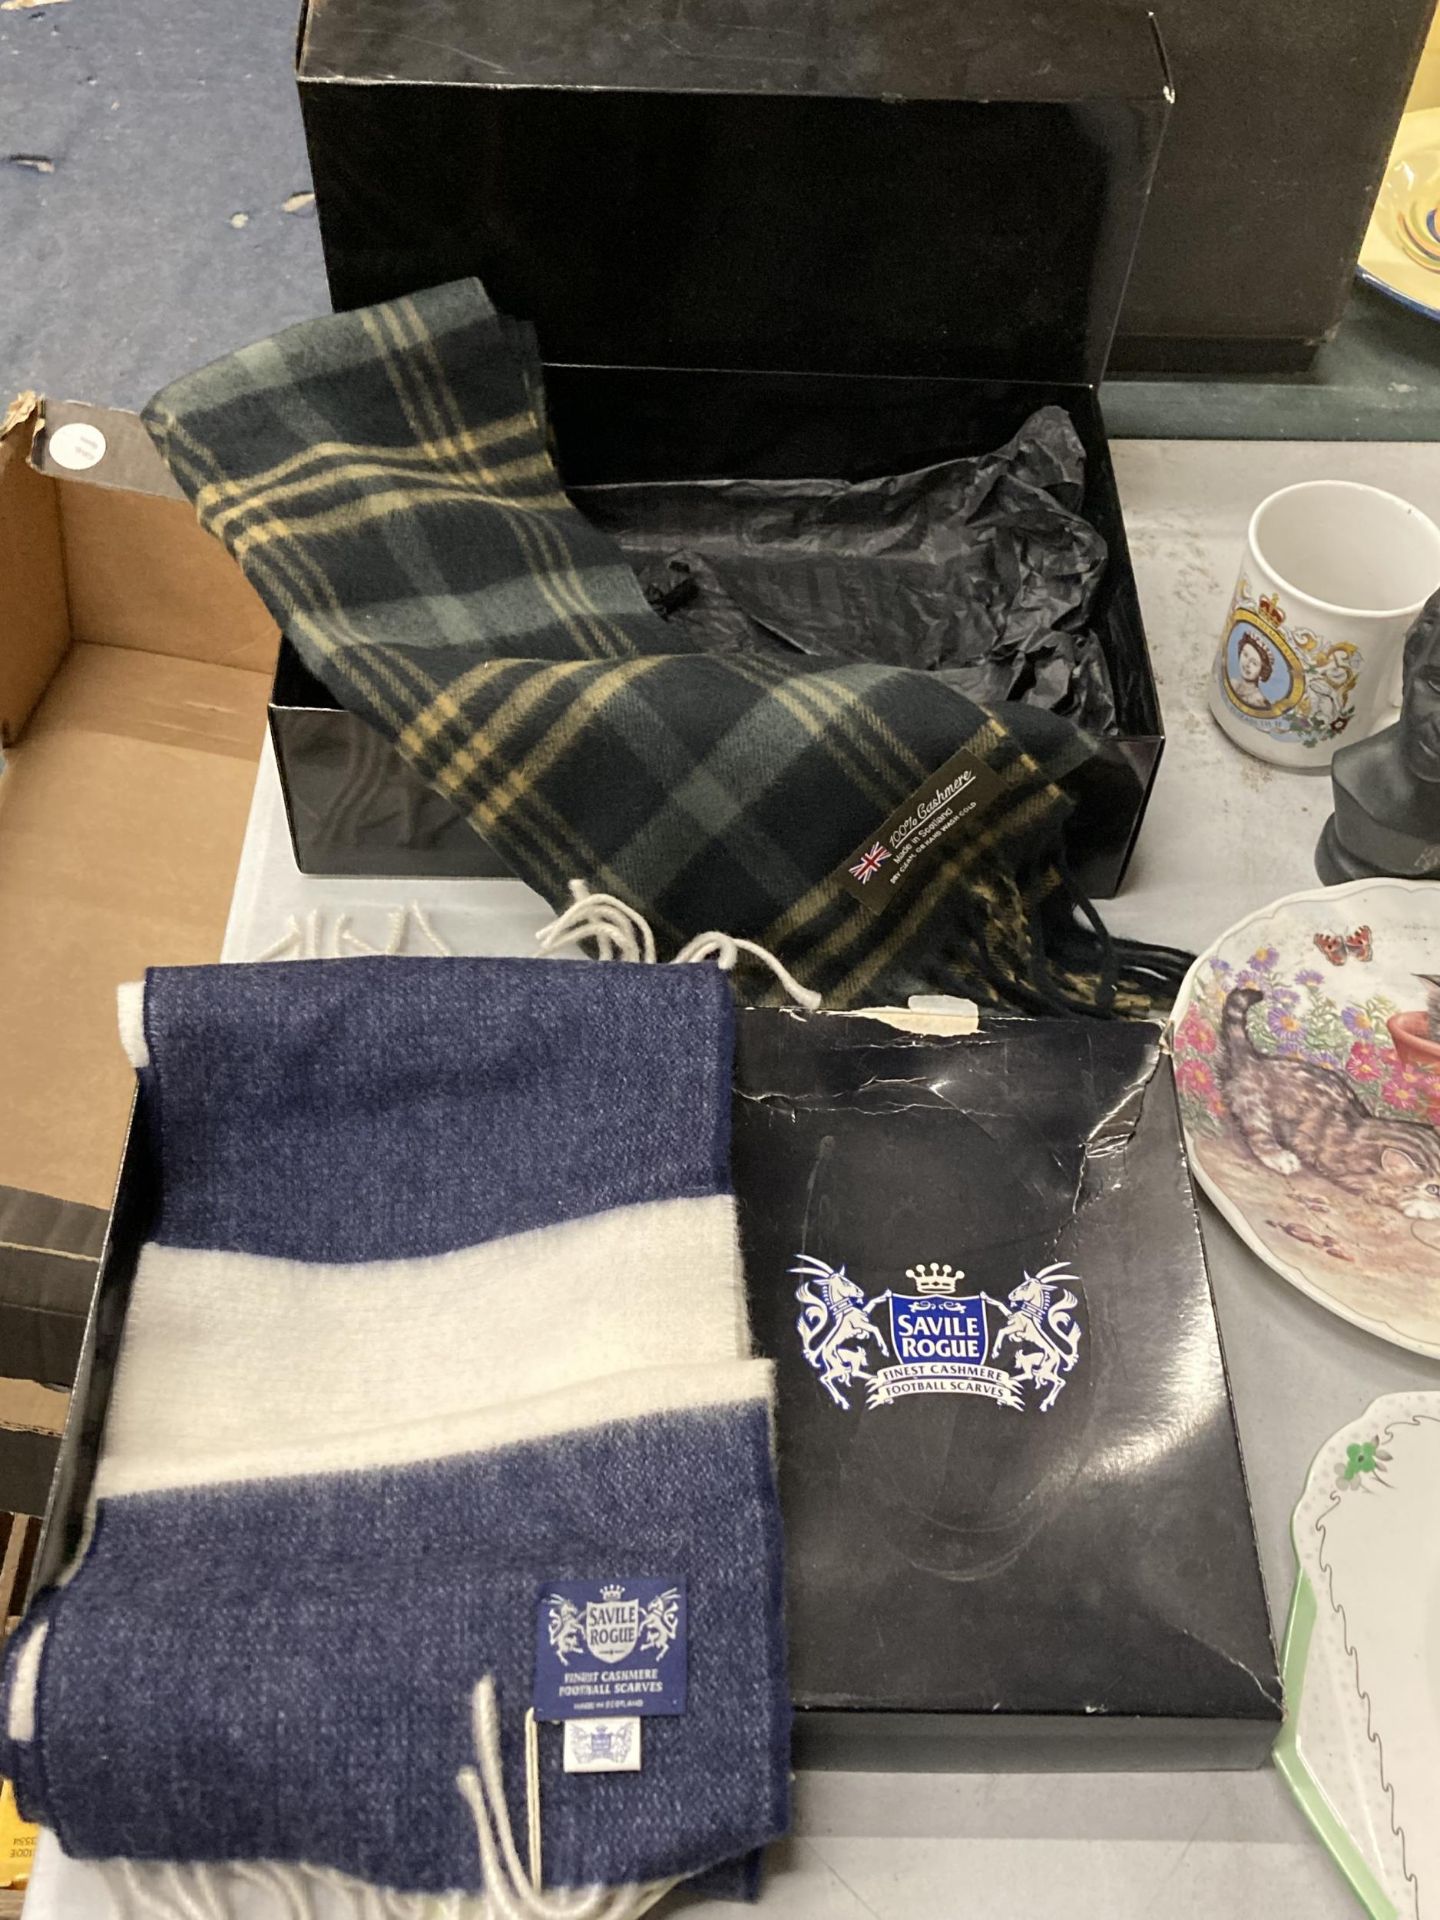 A BOXED SAVILLE ROGUE CASHMERE FOOTBALL SCARF AND FURTHER CASHMERE SCOTTISH SCARF